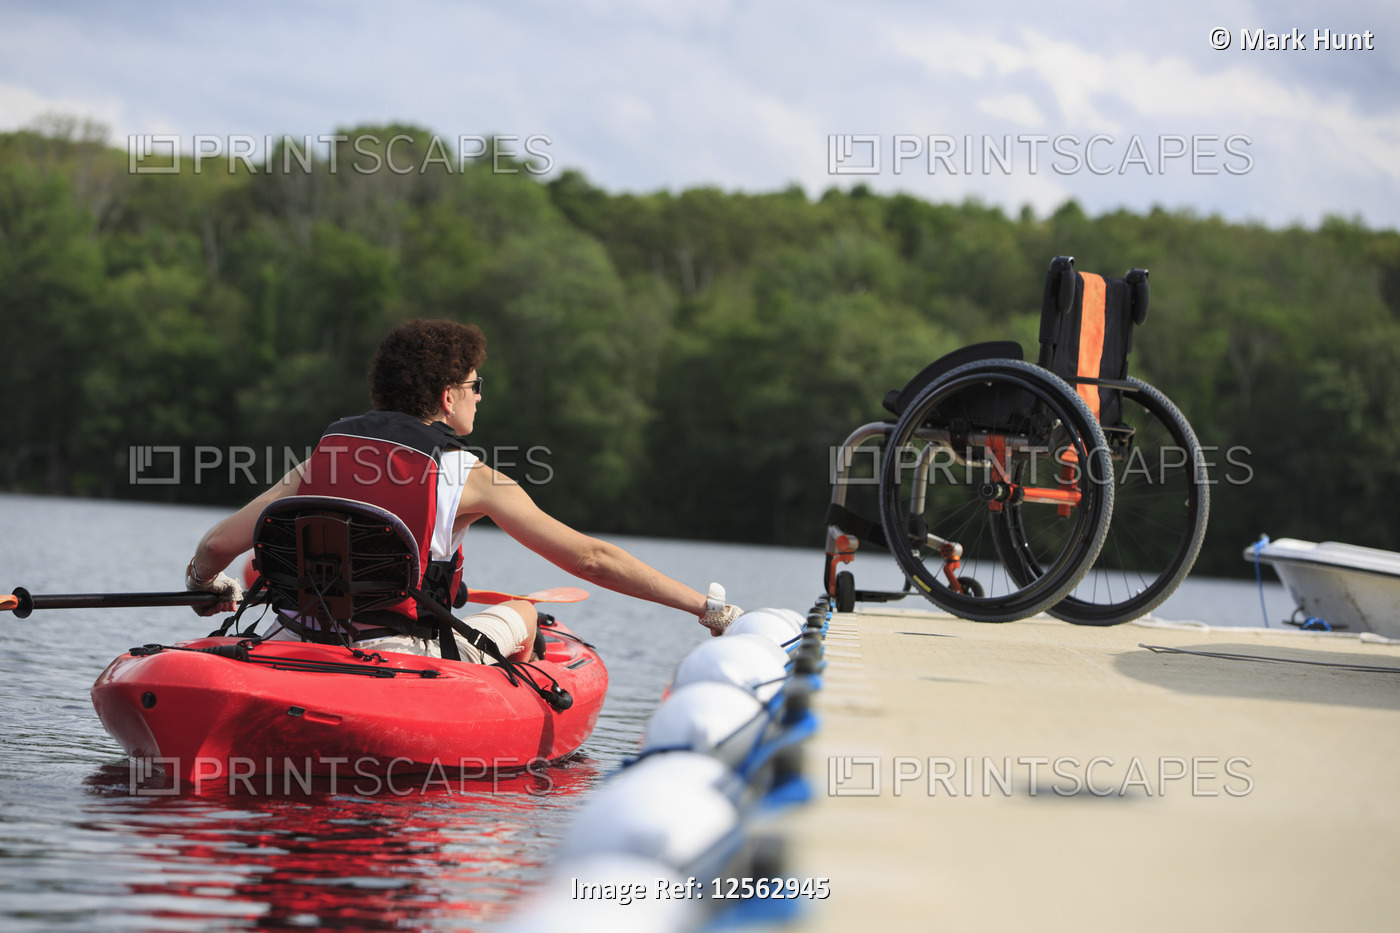 Woman with a Spinal Cord Injury learning how to use a kayak